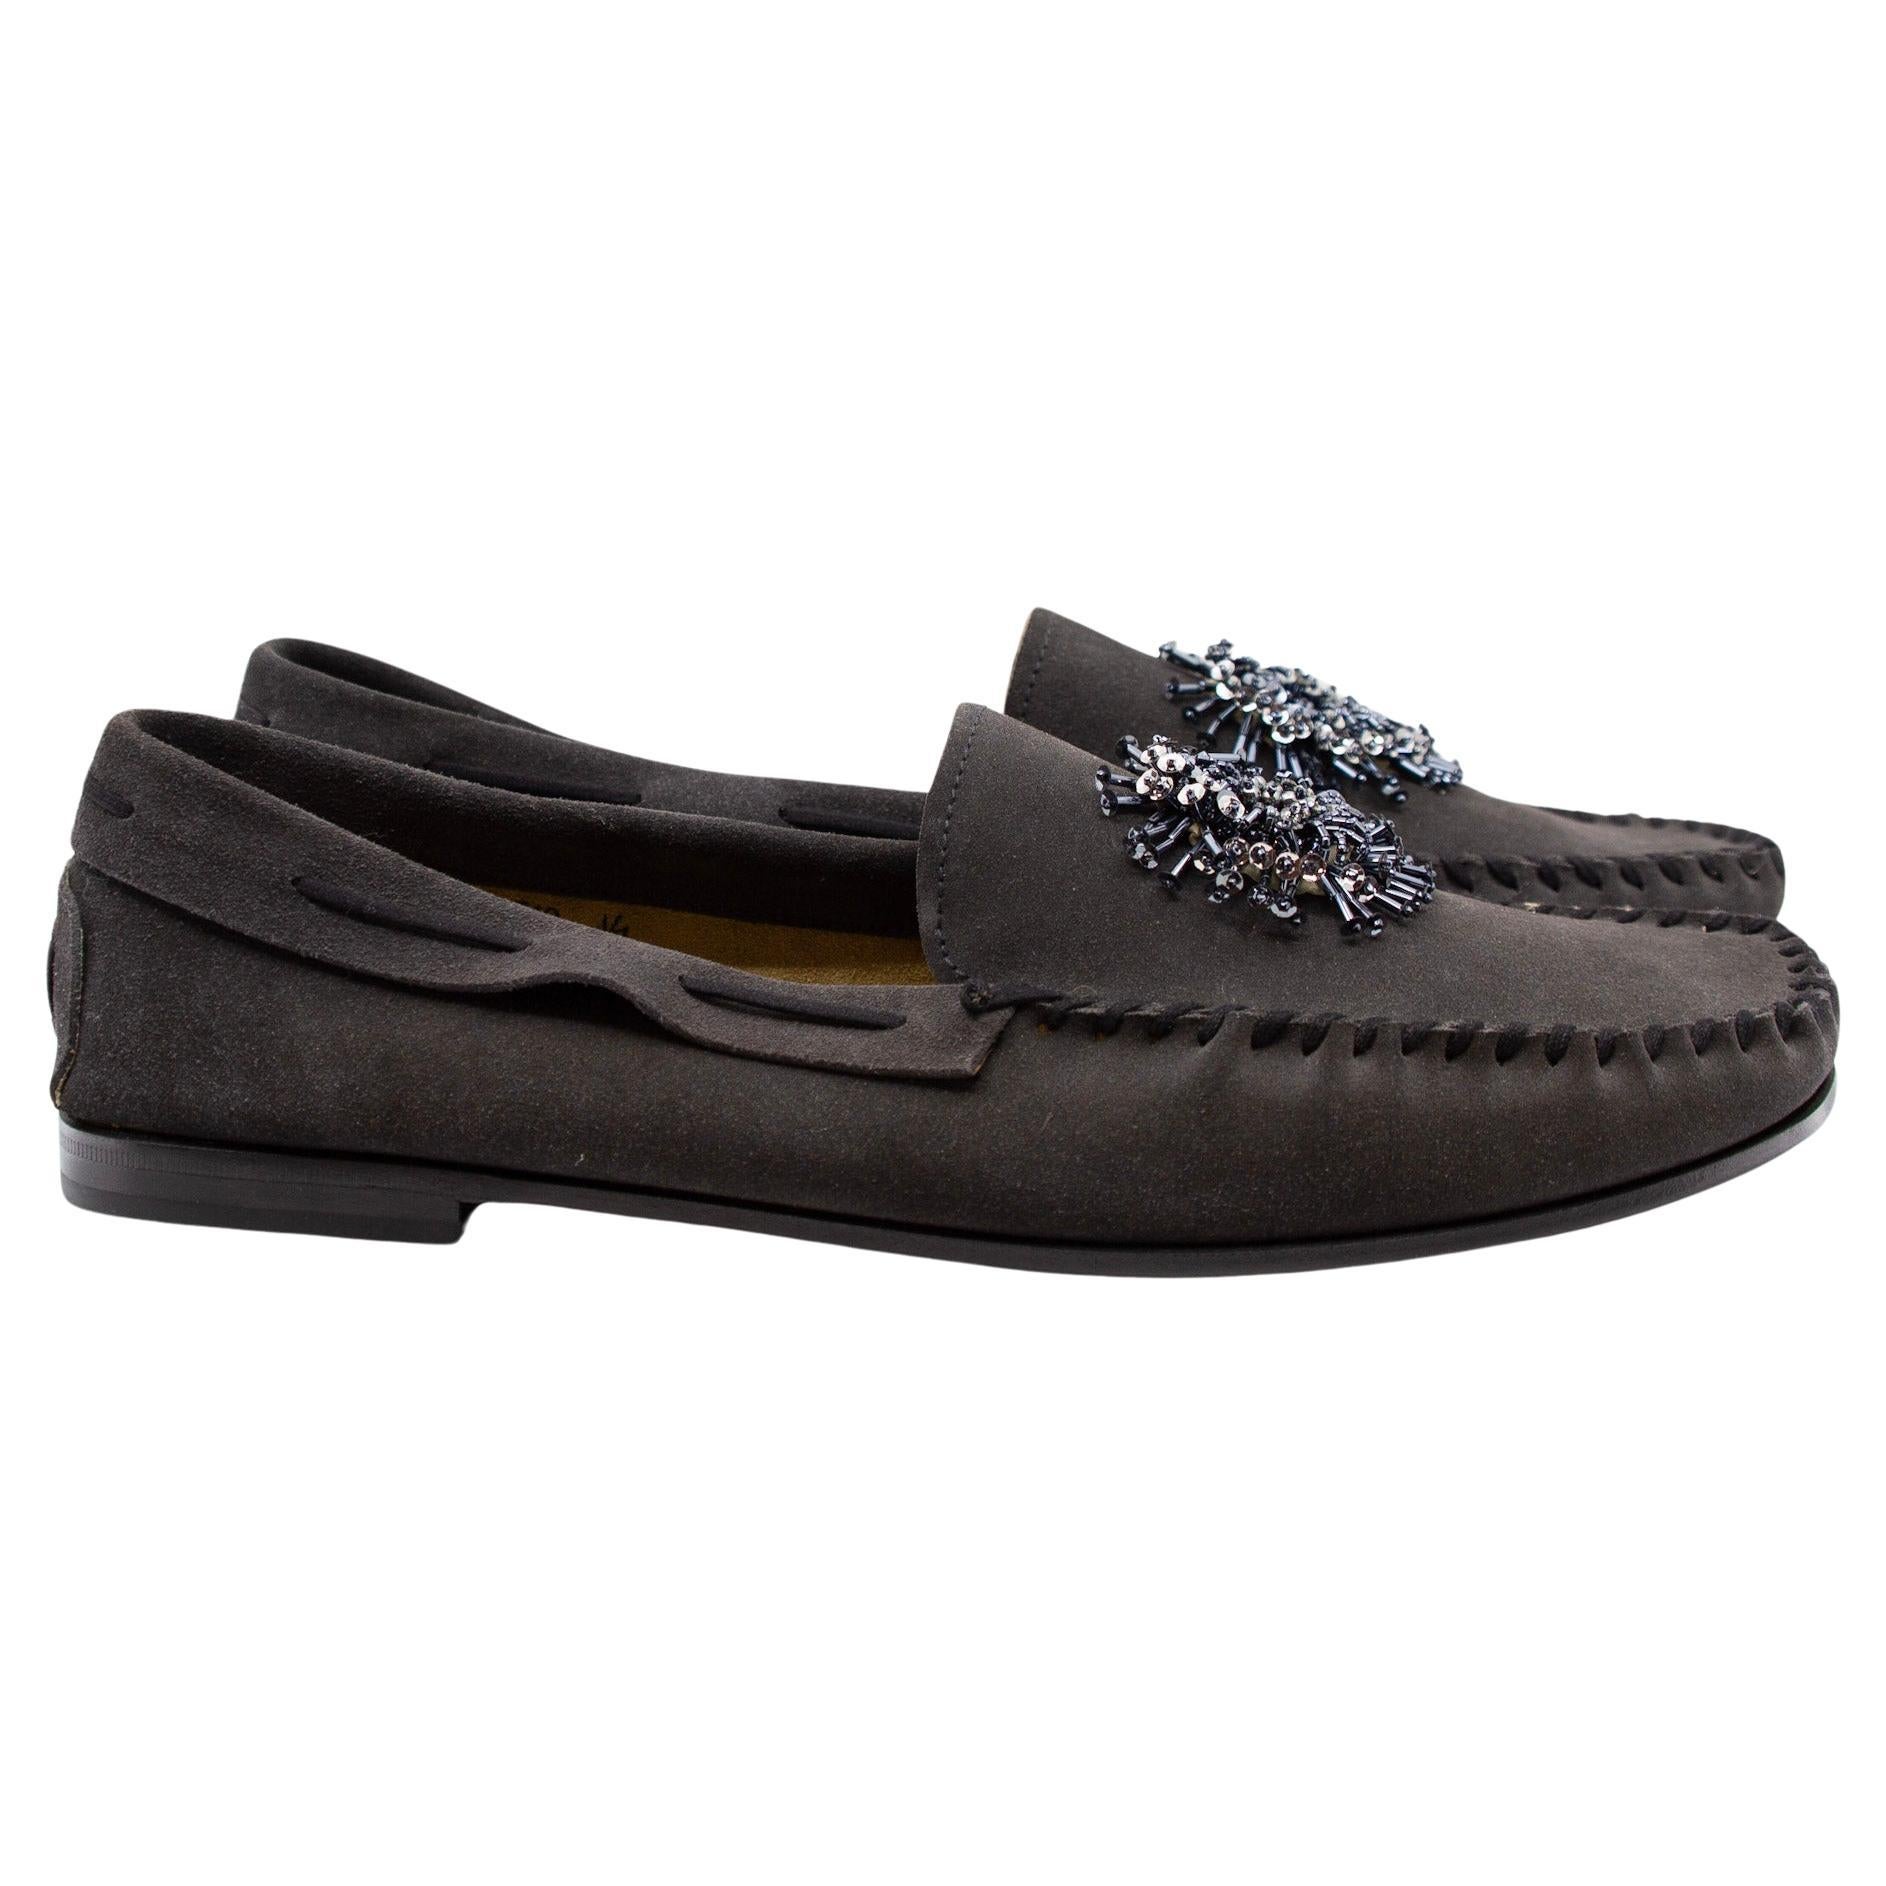 Prada Charcoal Suede Loafers with Beaded Embellishments and Leather Soles For Sale